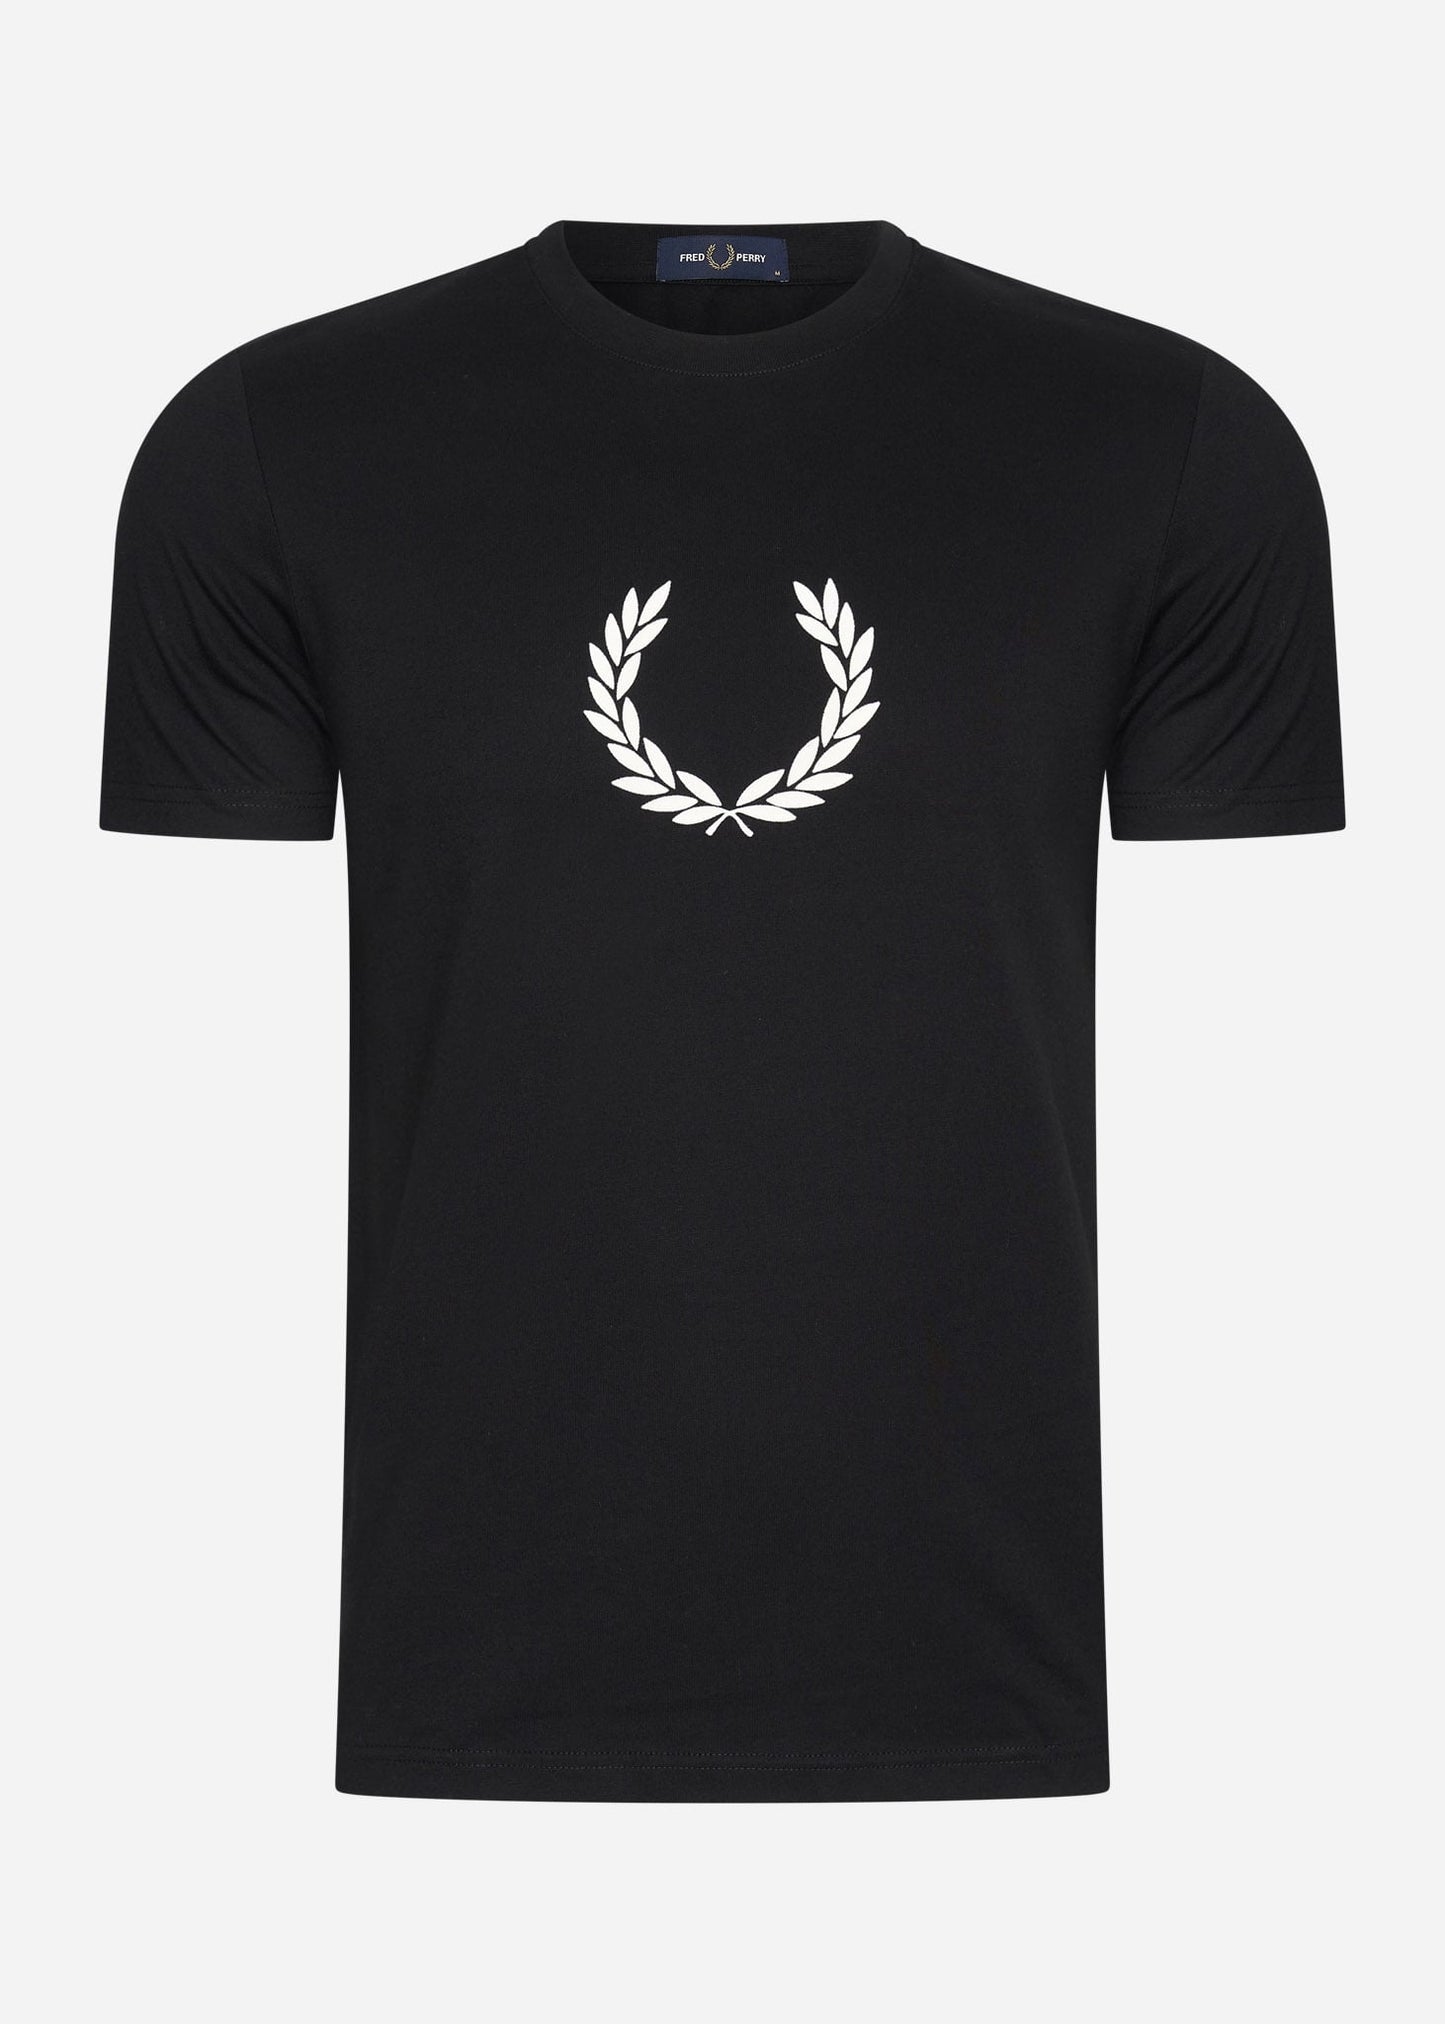 Fred Perry T-shirts  Flocked laurel wreath graphic tee - black 